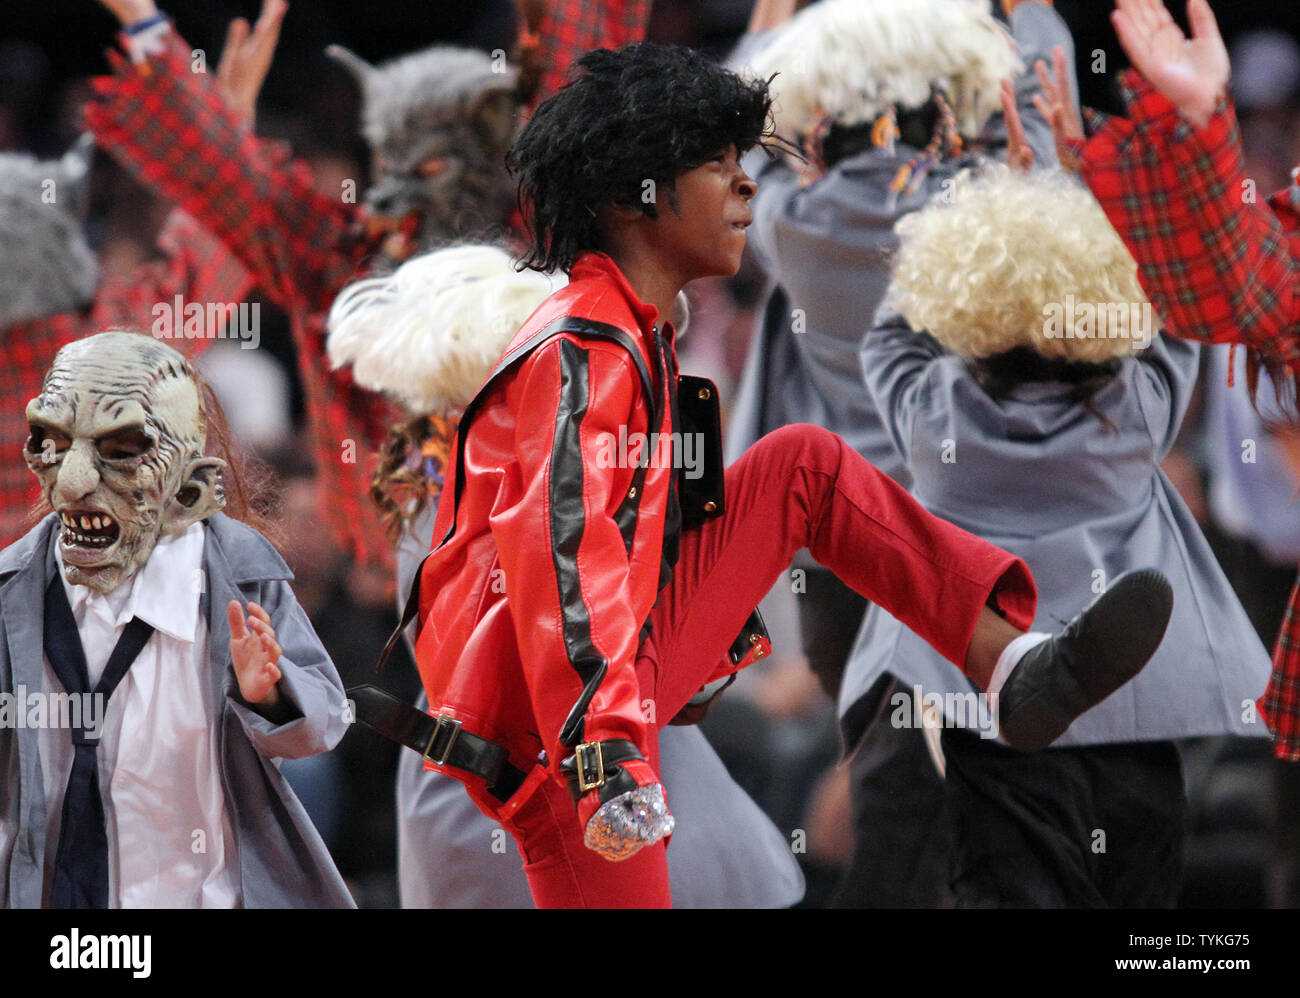 The Knicks City Kids dance to Michael Jackson's Thriller during a time out as the New York Knicks play the Philadelphia 76ers at Madison Square Garden in New York City on October 31, 2009.    UPI/John Angelillo Stock Photo